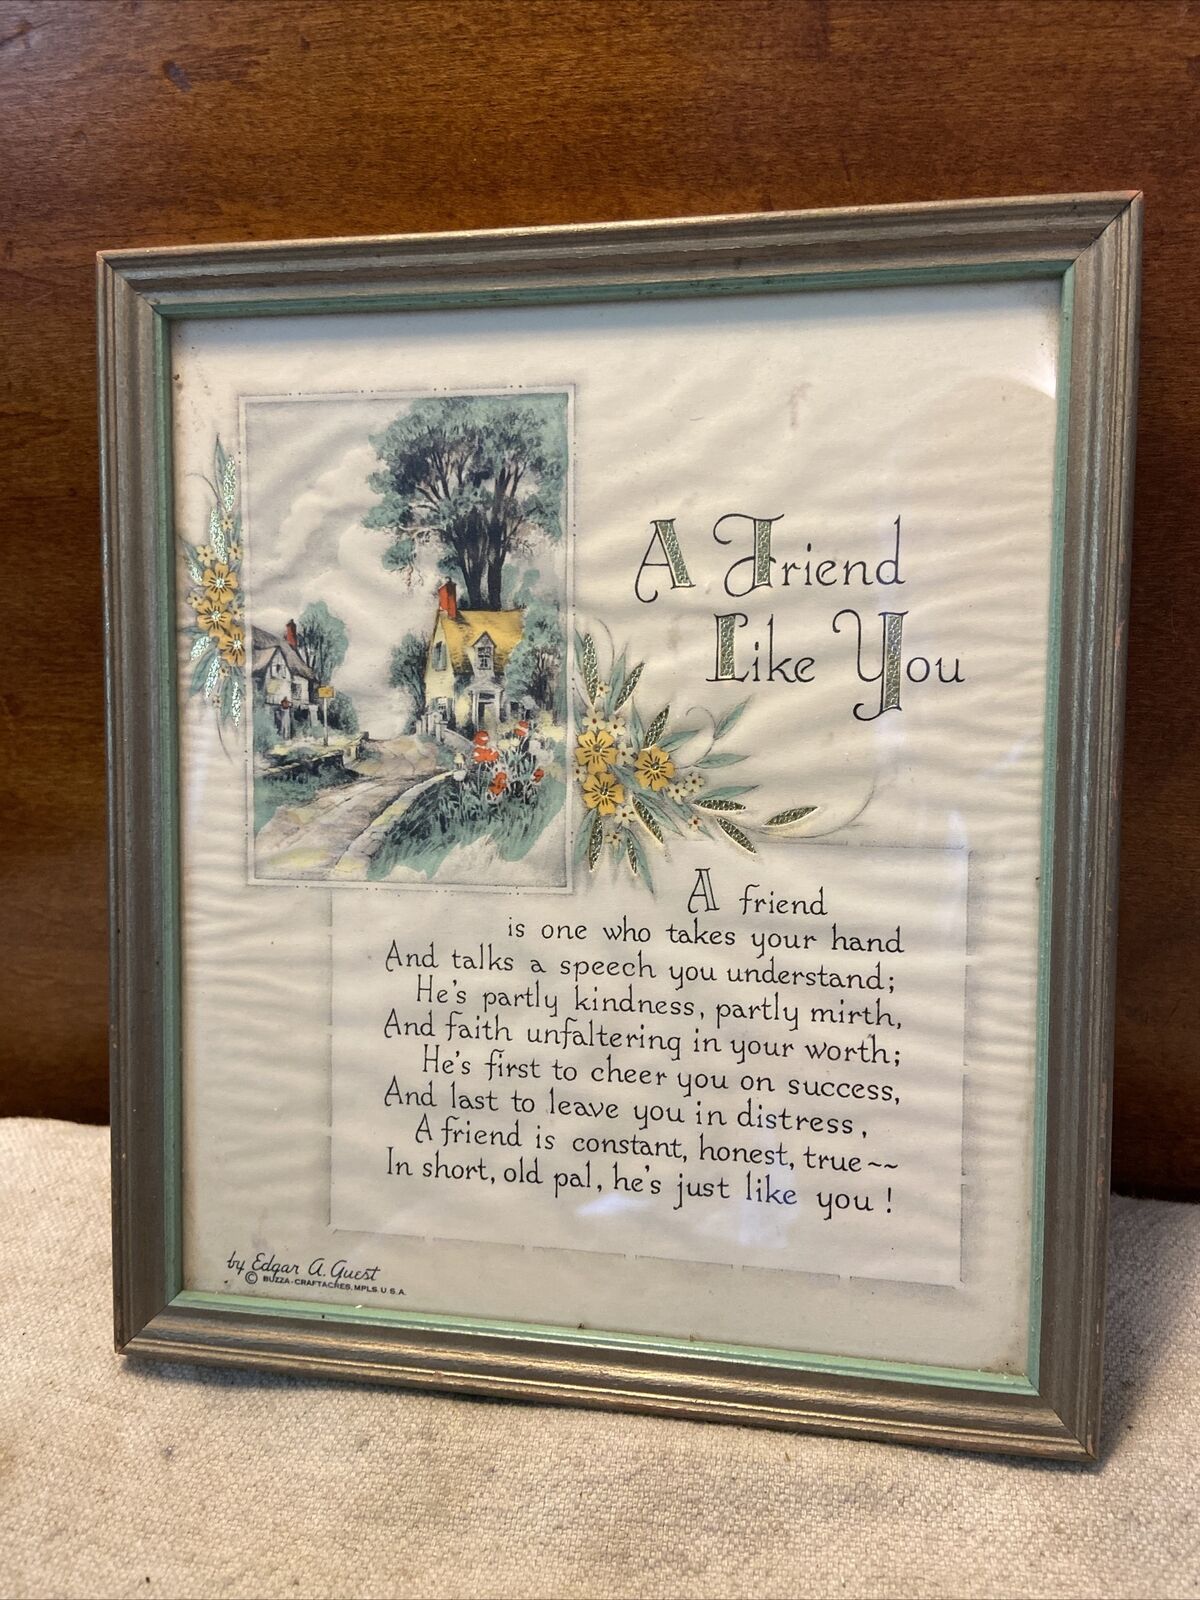 Vintage 1940’s Edgar Quest 6x8” Framed Poem “A Friend Like You” Wall Plaque